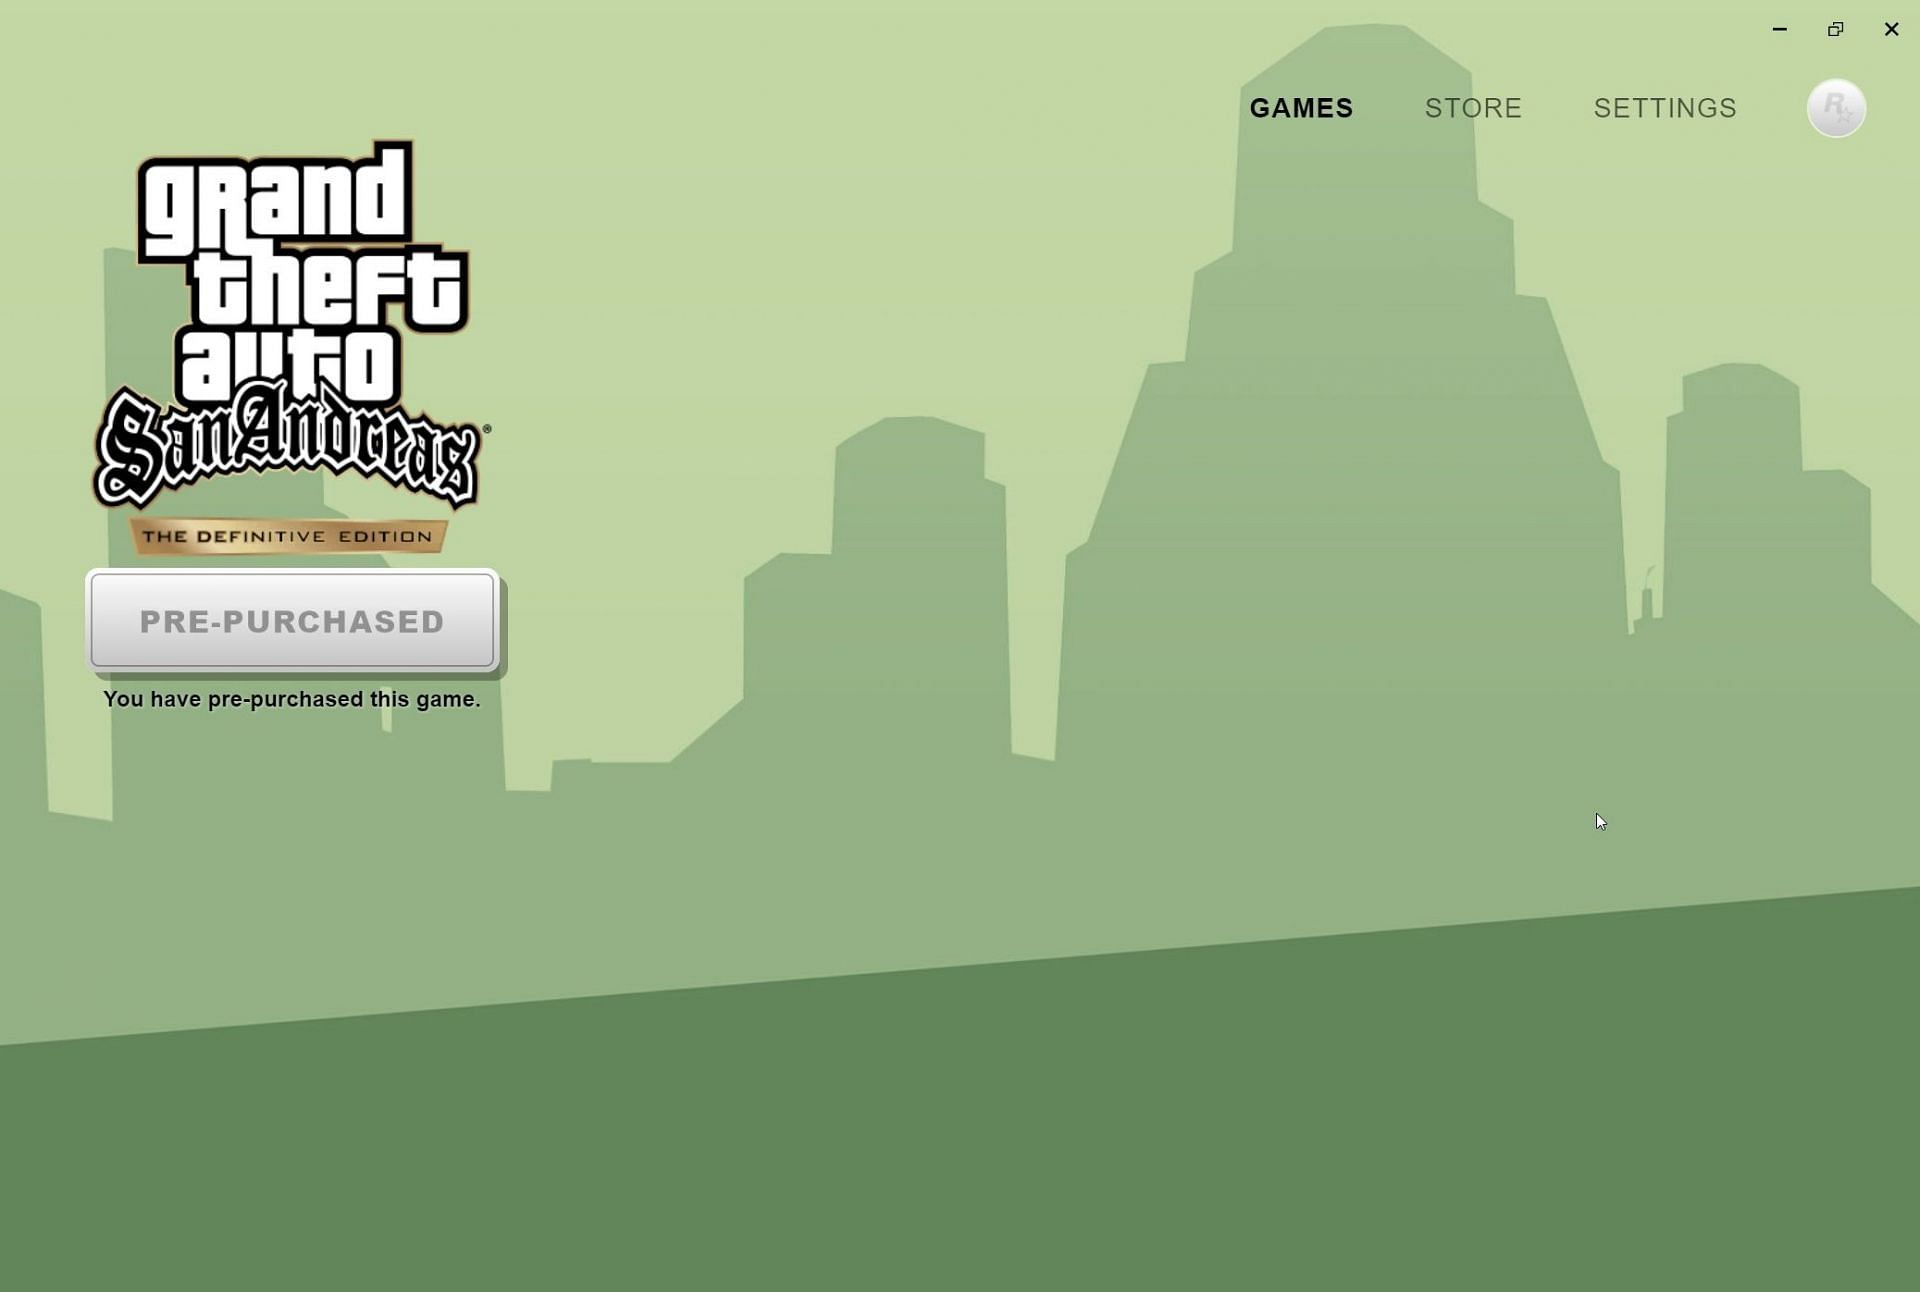 A screenshot of what GTA San Andreas - The Definitive Edition will look like in the Rockstar Games Launcher (Image via alloc8or/gtaforums)